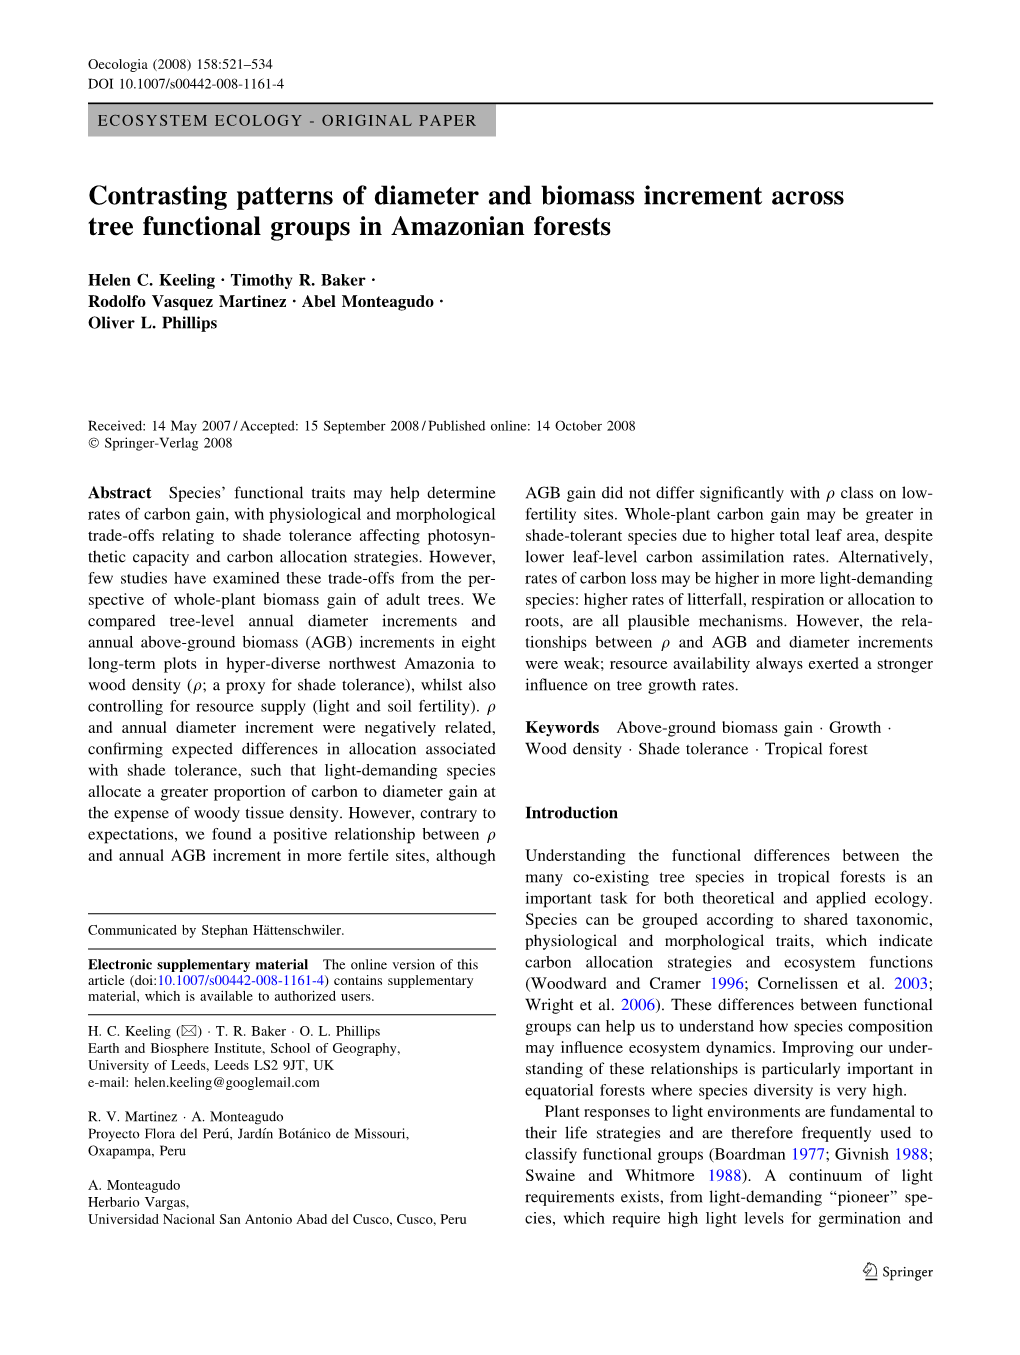 Contrasting Patterns of Diameter and Biomass Increment Across Tree Functional Groups in Amazonian Forests